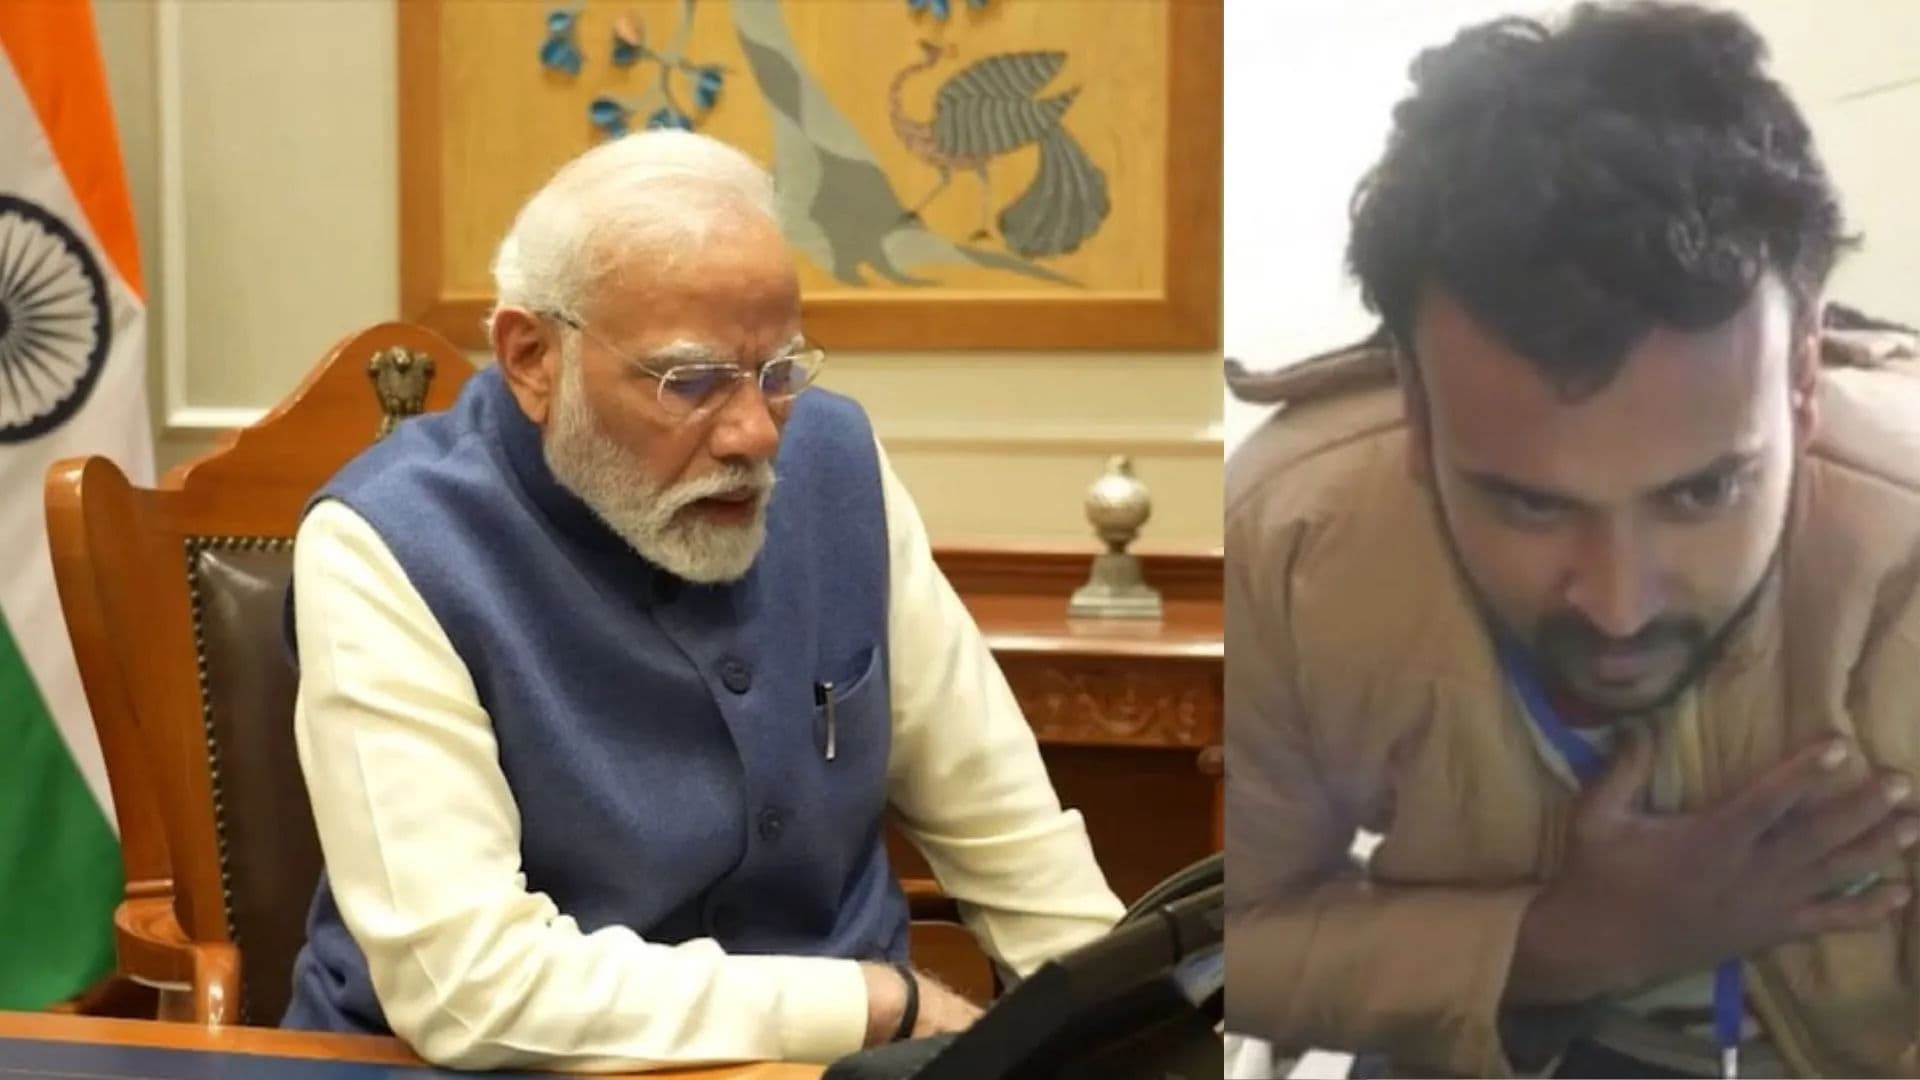 Prime Minister Modi extends gratitude to and praises the courage of the 41 workers rescued from Uttarakhand's tunnel collapse.